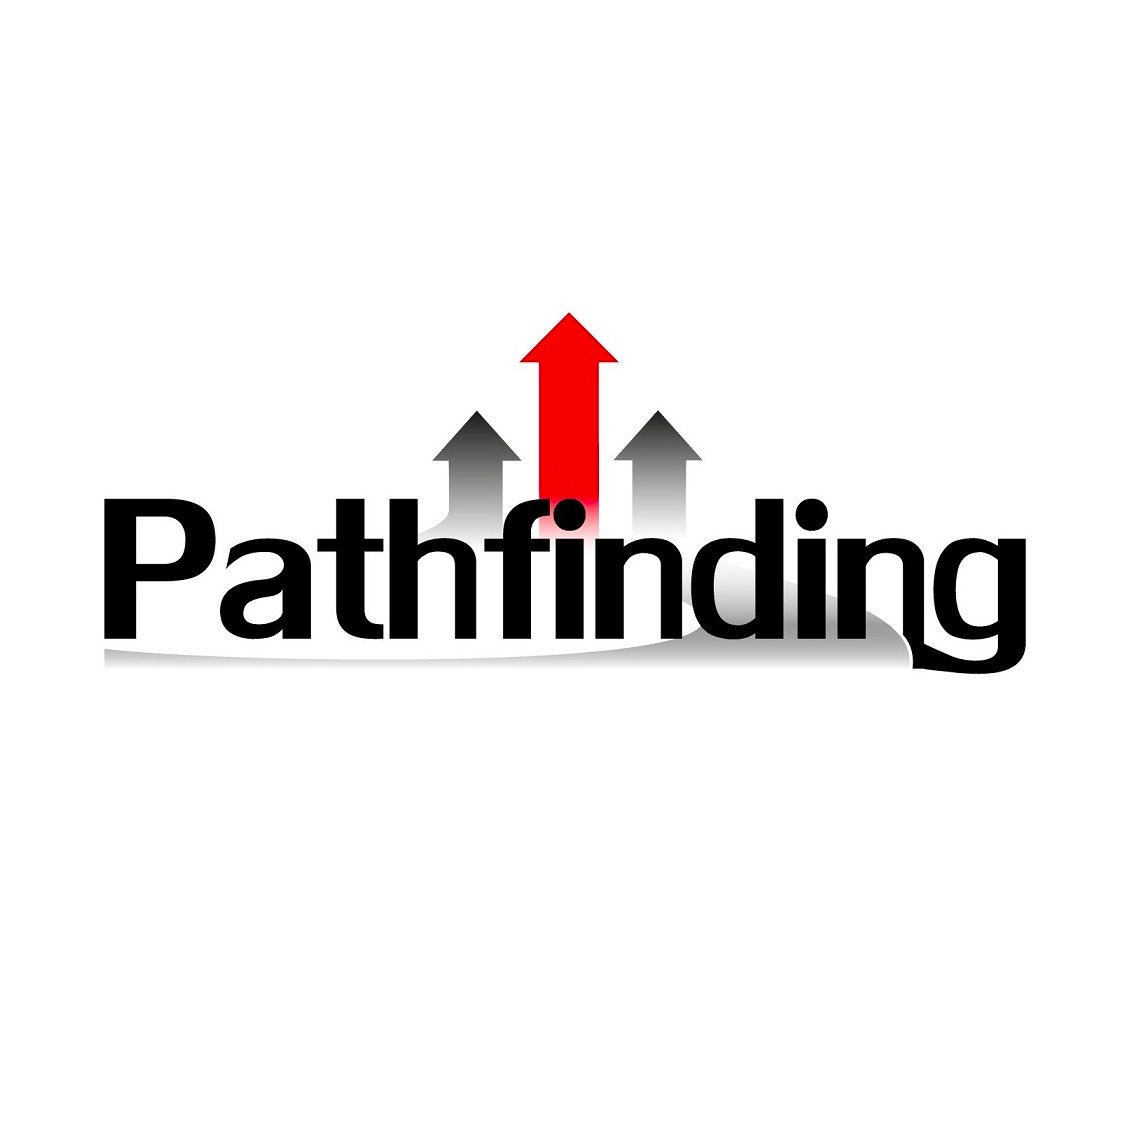 Pathfinding S.A. is a Argentine company dedicated to  consultancy, investigation, design, support, software development, and  rendering of outsourcing services.